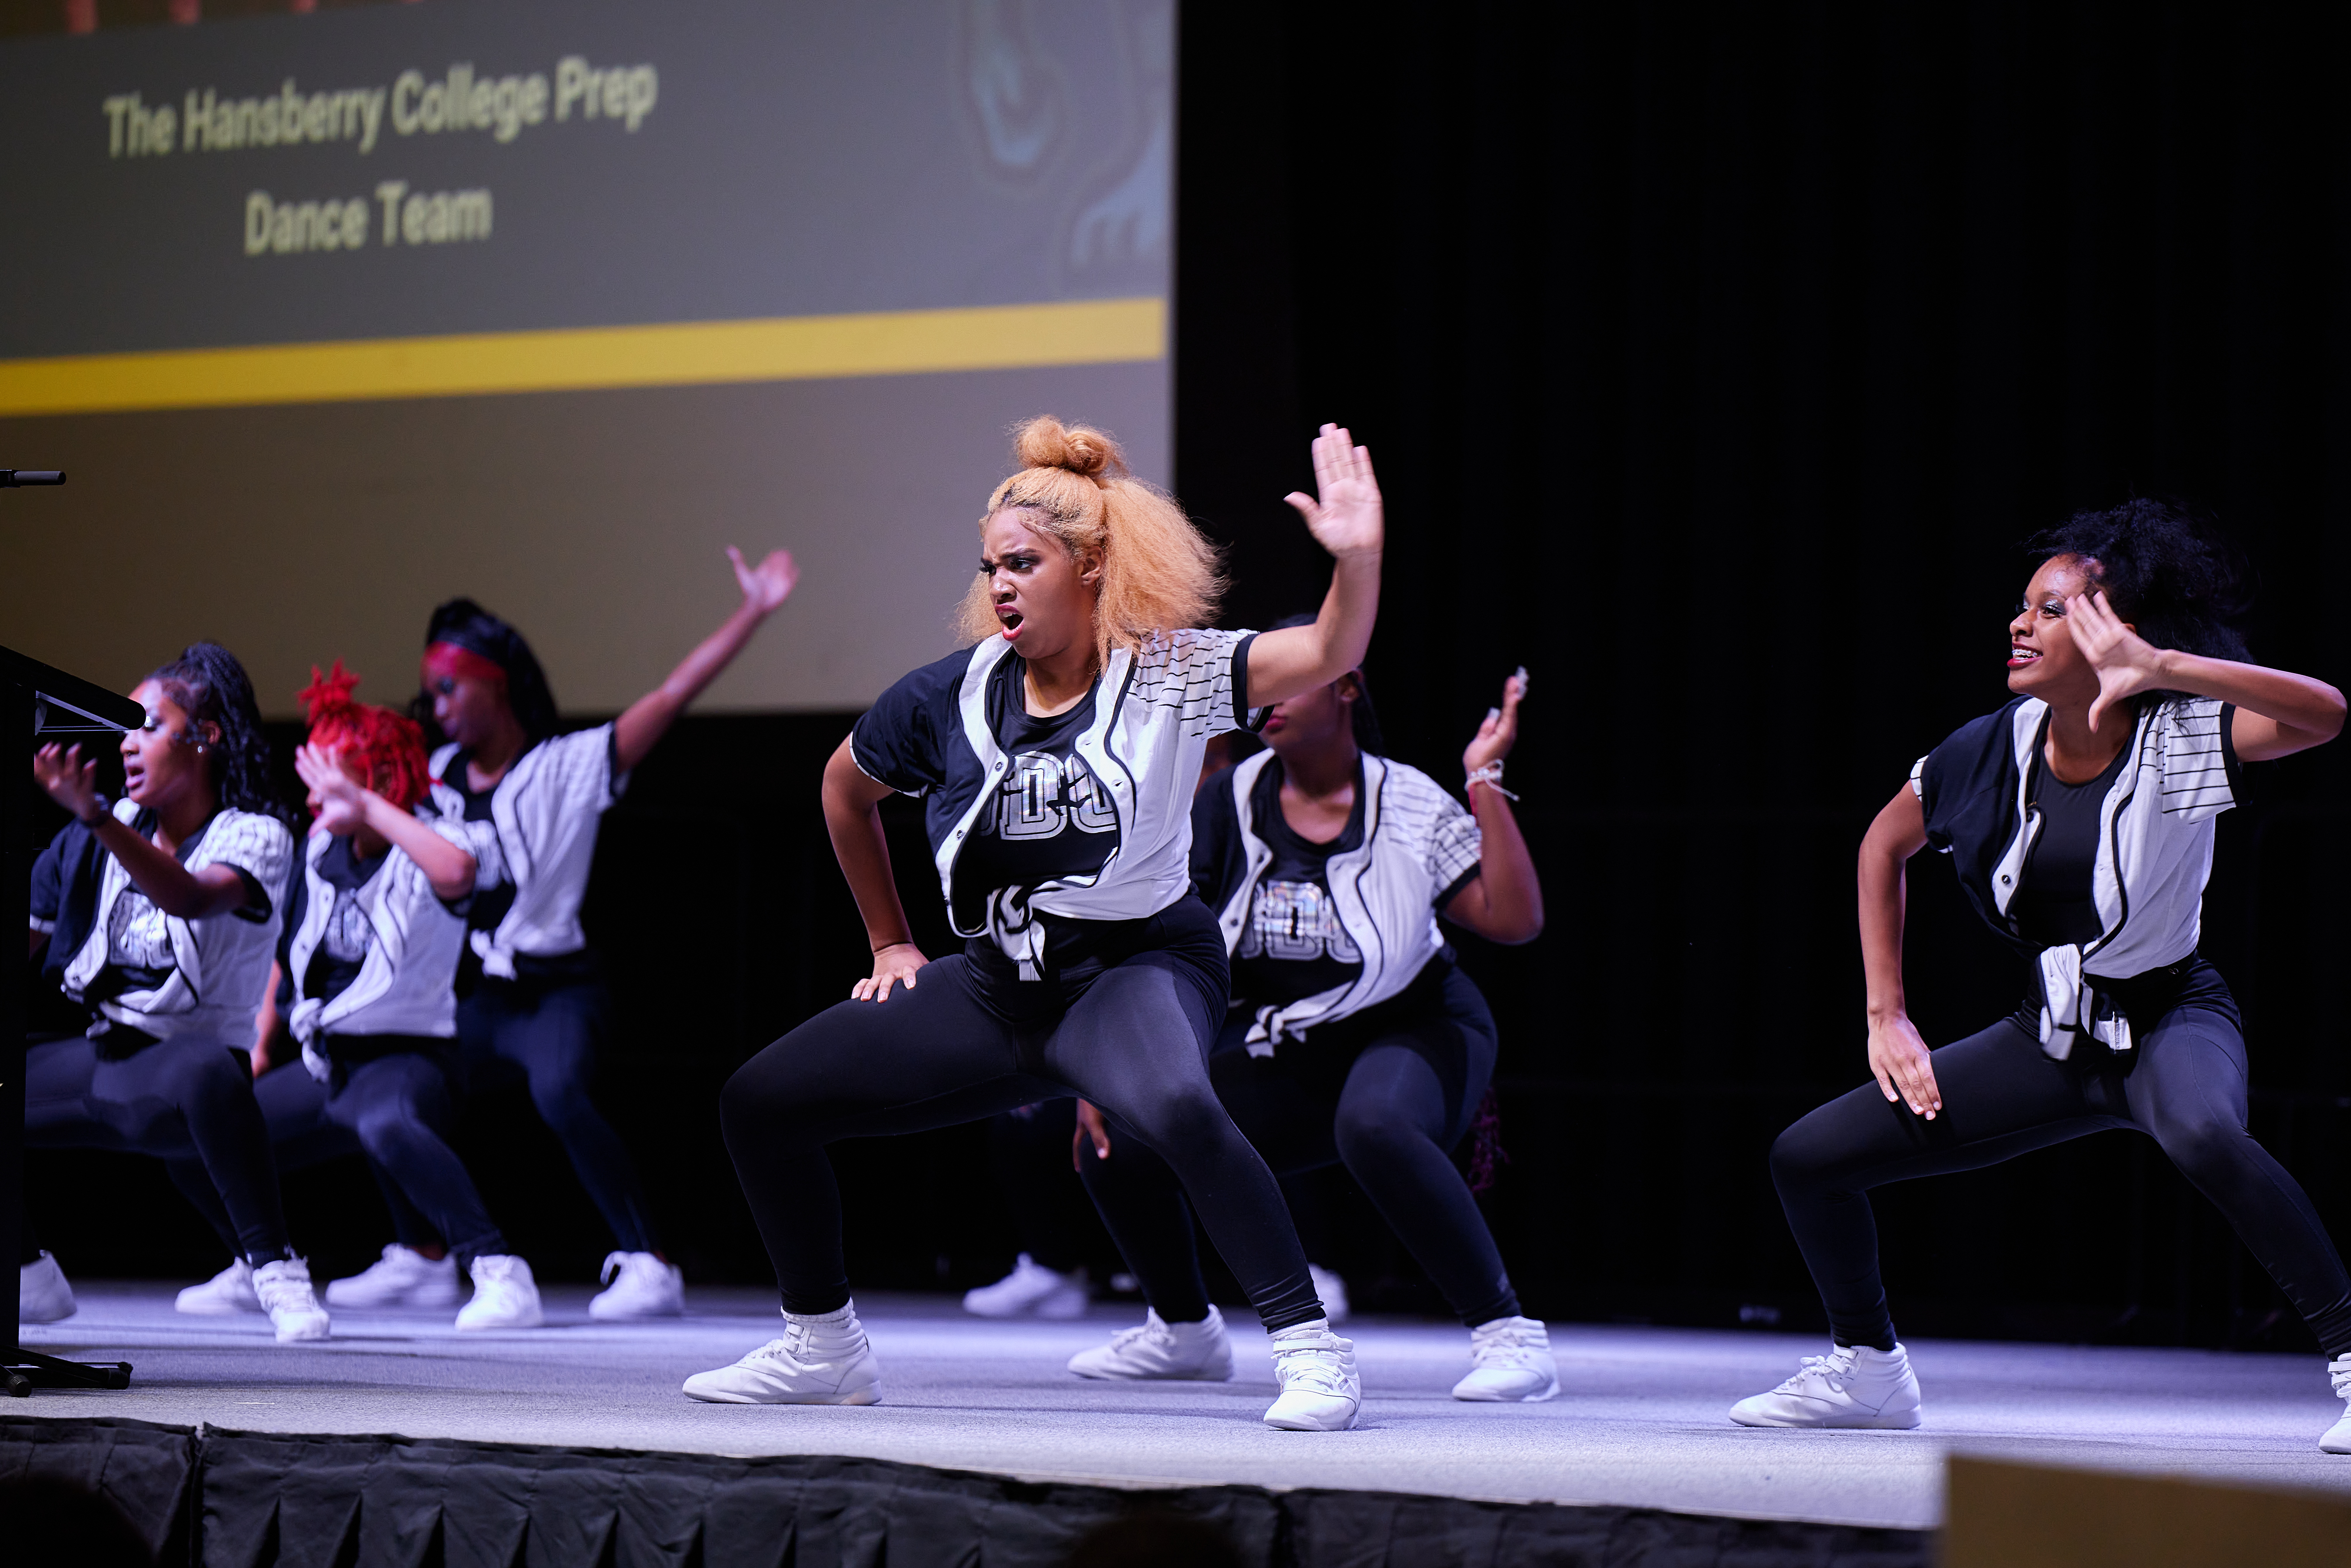 Photo shows a wide shot of the Hansberry dance team, the Bengal Dance Collective, performing on stage at the Noble Schools' Staff Kickoff for the 2023-2024 school year. They are all bent low at the knees with their right hand on their thigh and their left hand raised in the air. The dancer in the center of the photo has a deep look of concentration and effort on her face.